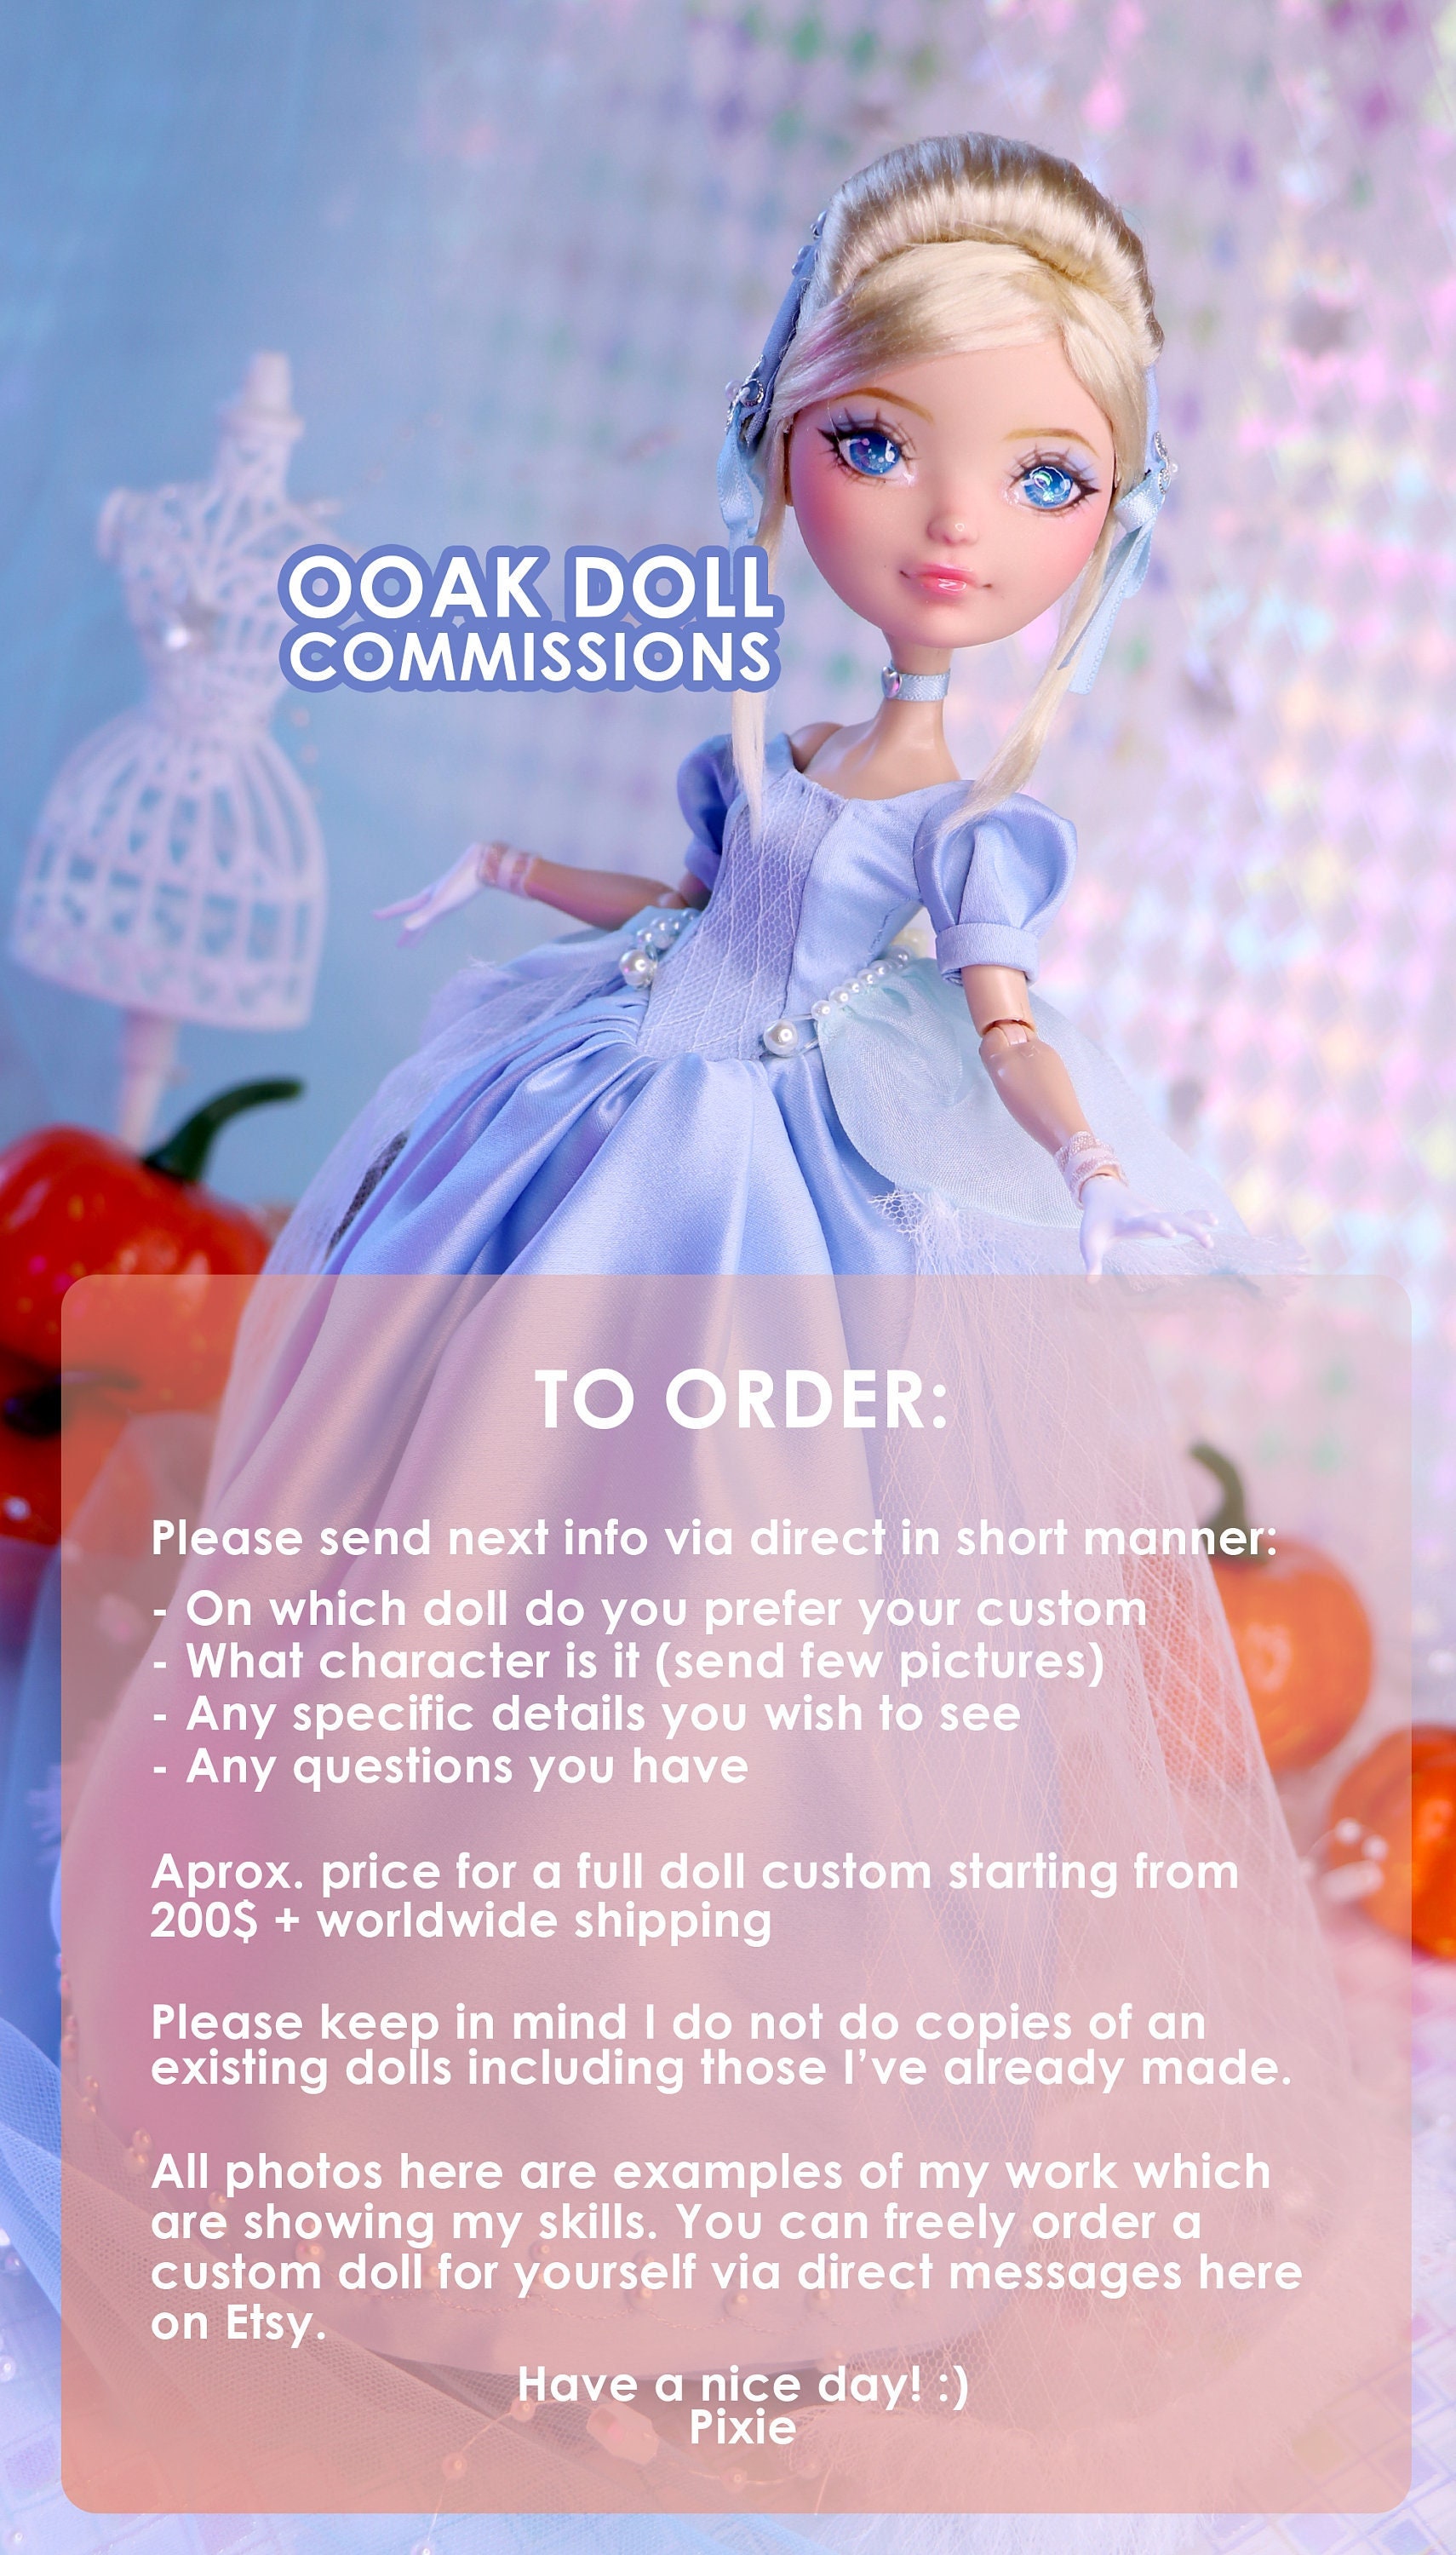 Clothes for LOL OMG 💚 outfit for OMG⭐ handmade 🇺🇦 clothes for dolls 😍